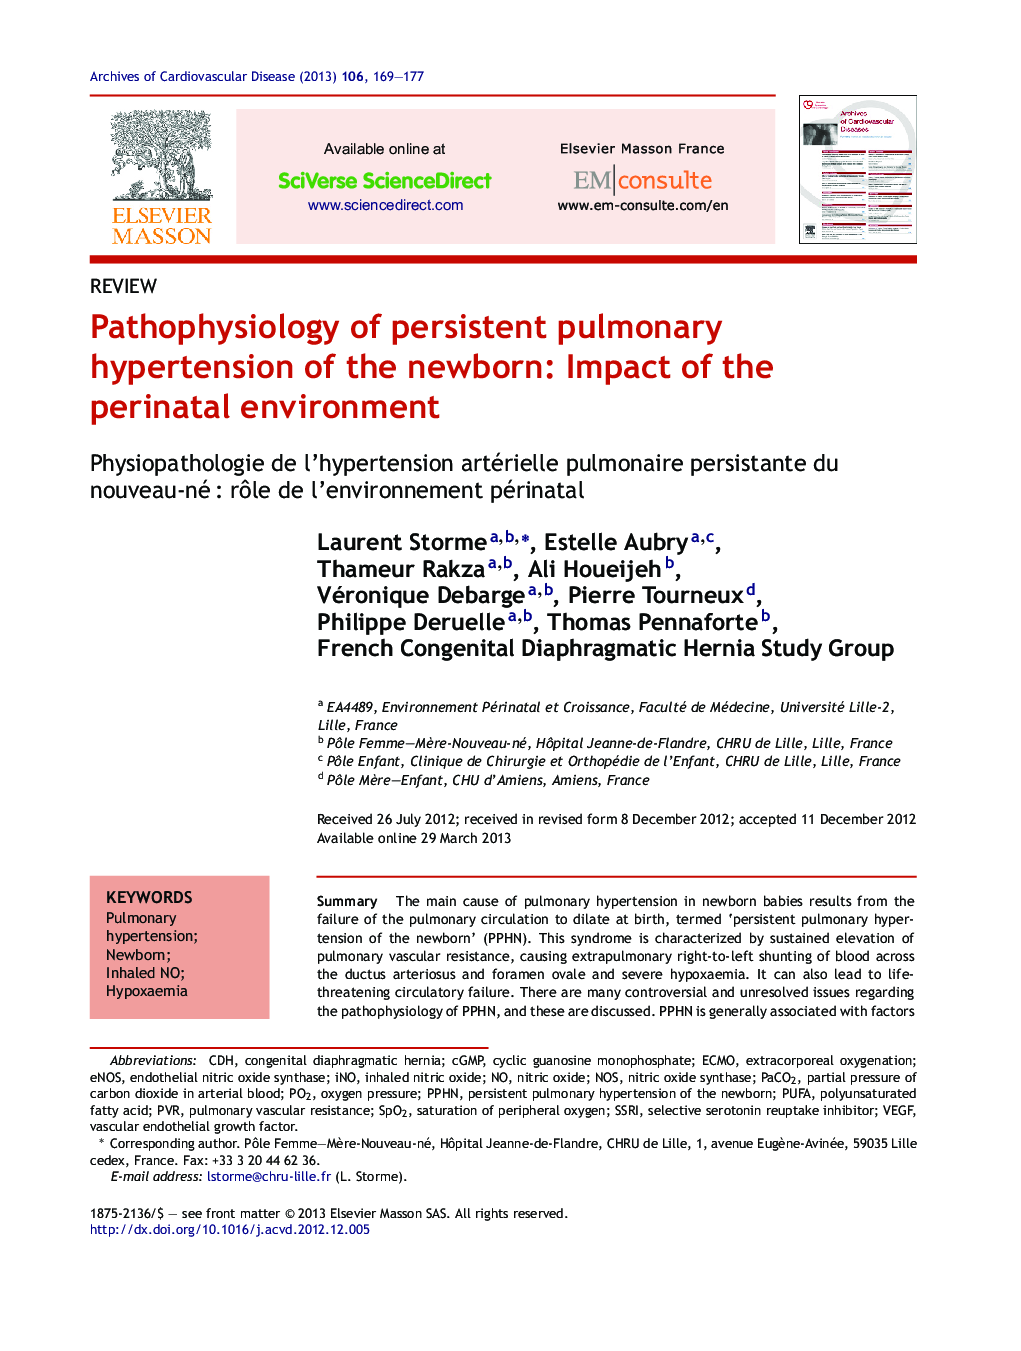 Pathophysiology of persistent pulmonary hypertension of the newborn: Impact of the perinatal environment